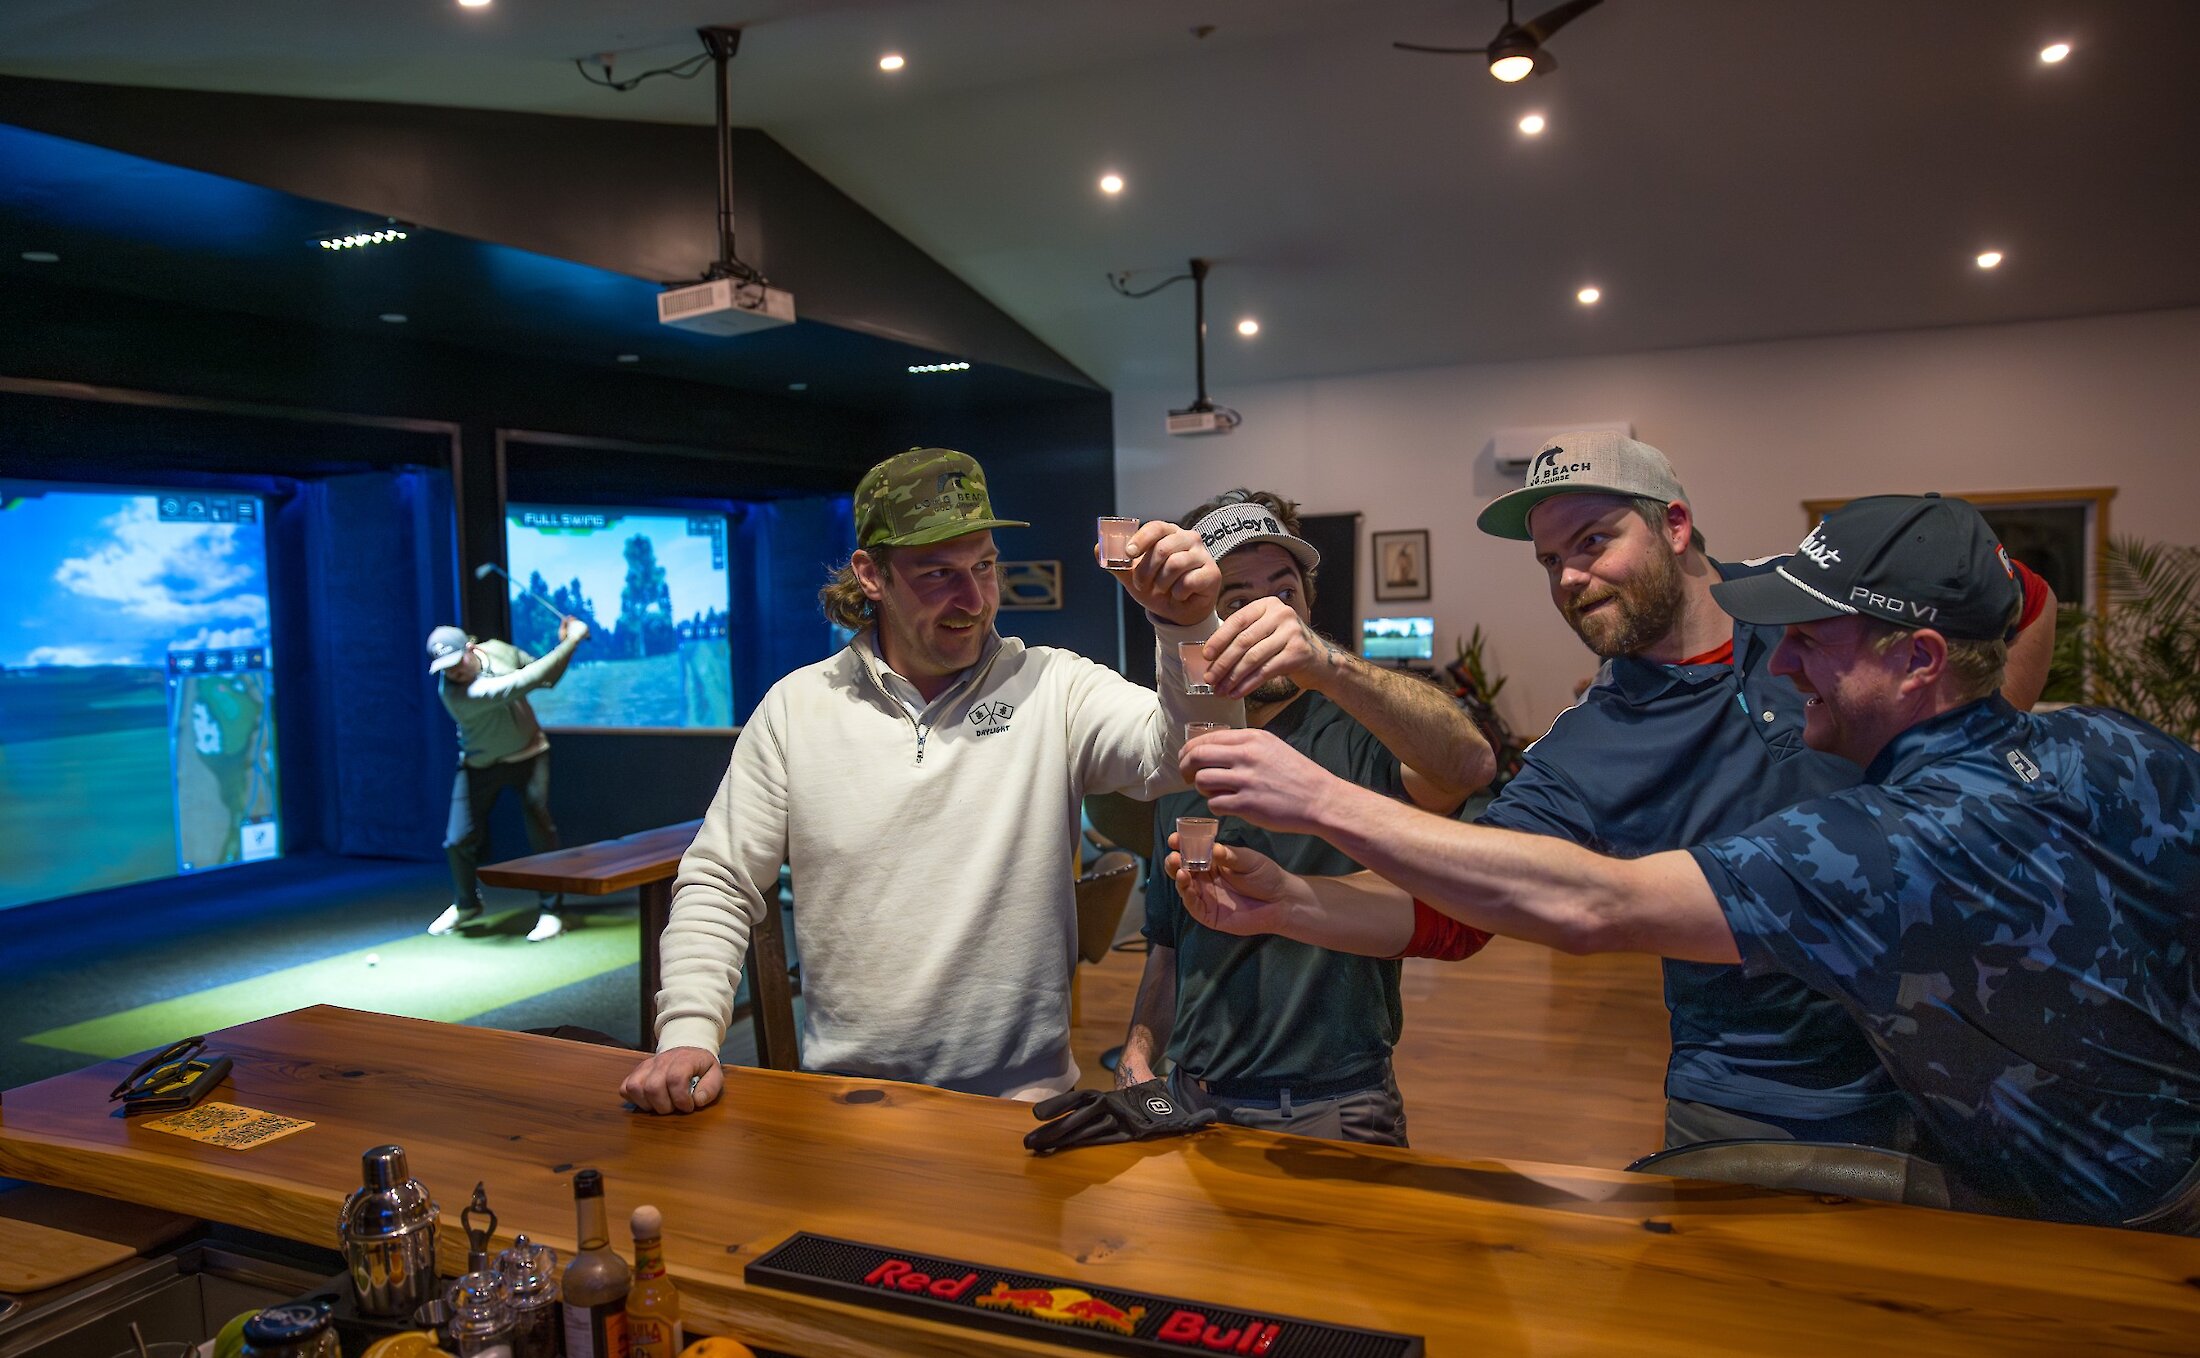 People having drinks at the bar inside the Long Beach Golf Course Pro Shop, by the golf simulators.